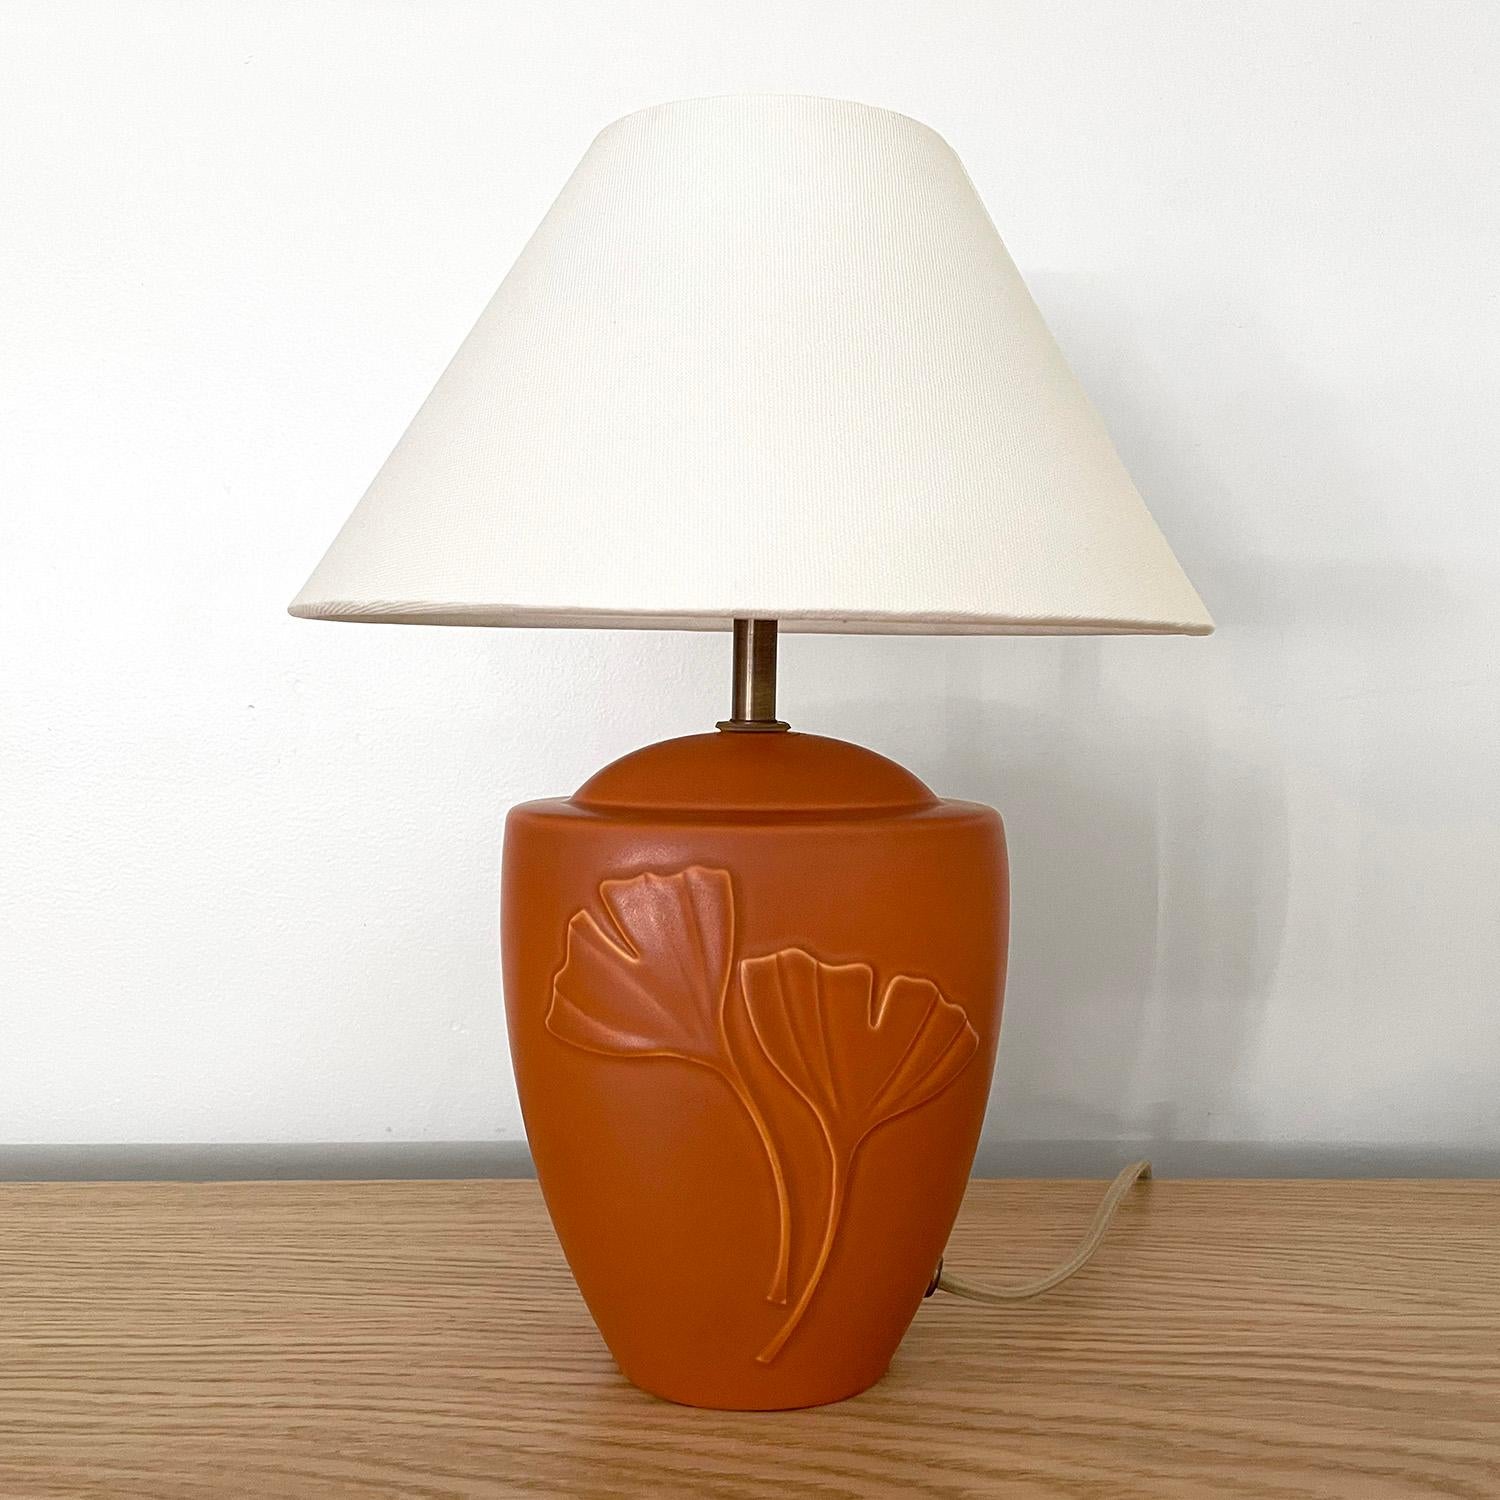 Soholm Danish stoneware gingko leaf lamp
Denmark, circa 1970s
Vibrant coral tone stoneware base
Two unique gingko leaf patterns which are a symbol of longevity
Newly rewired
New silk shade.